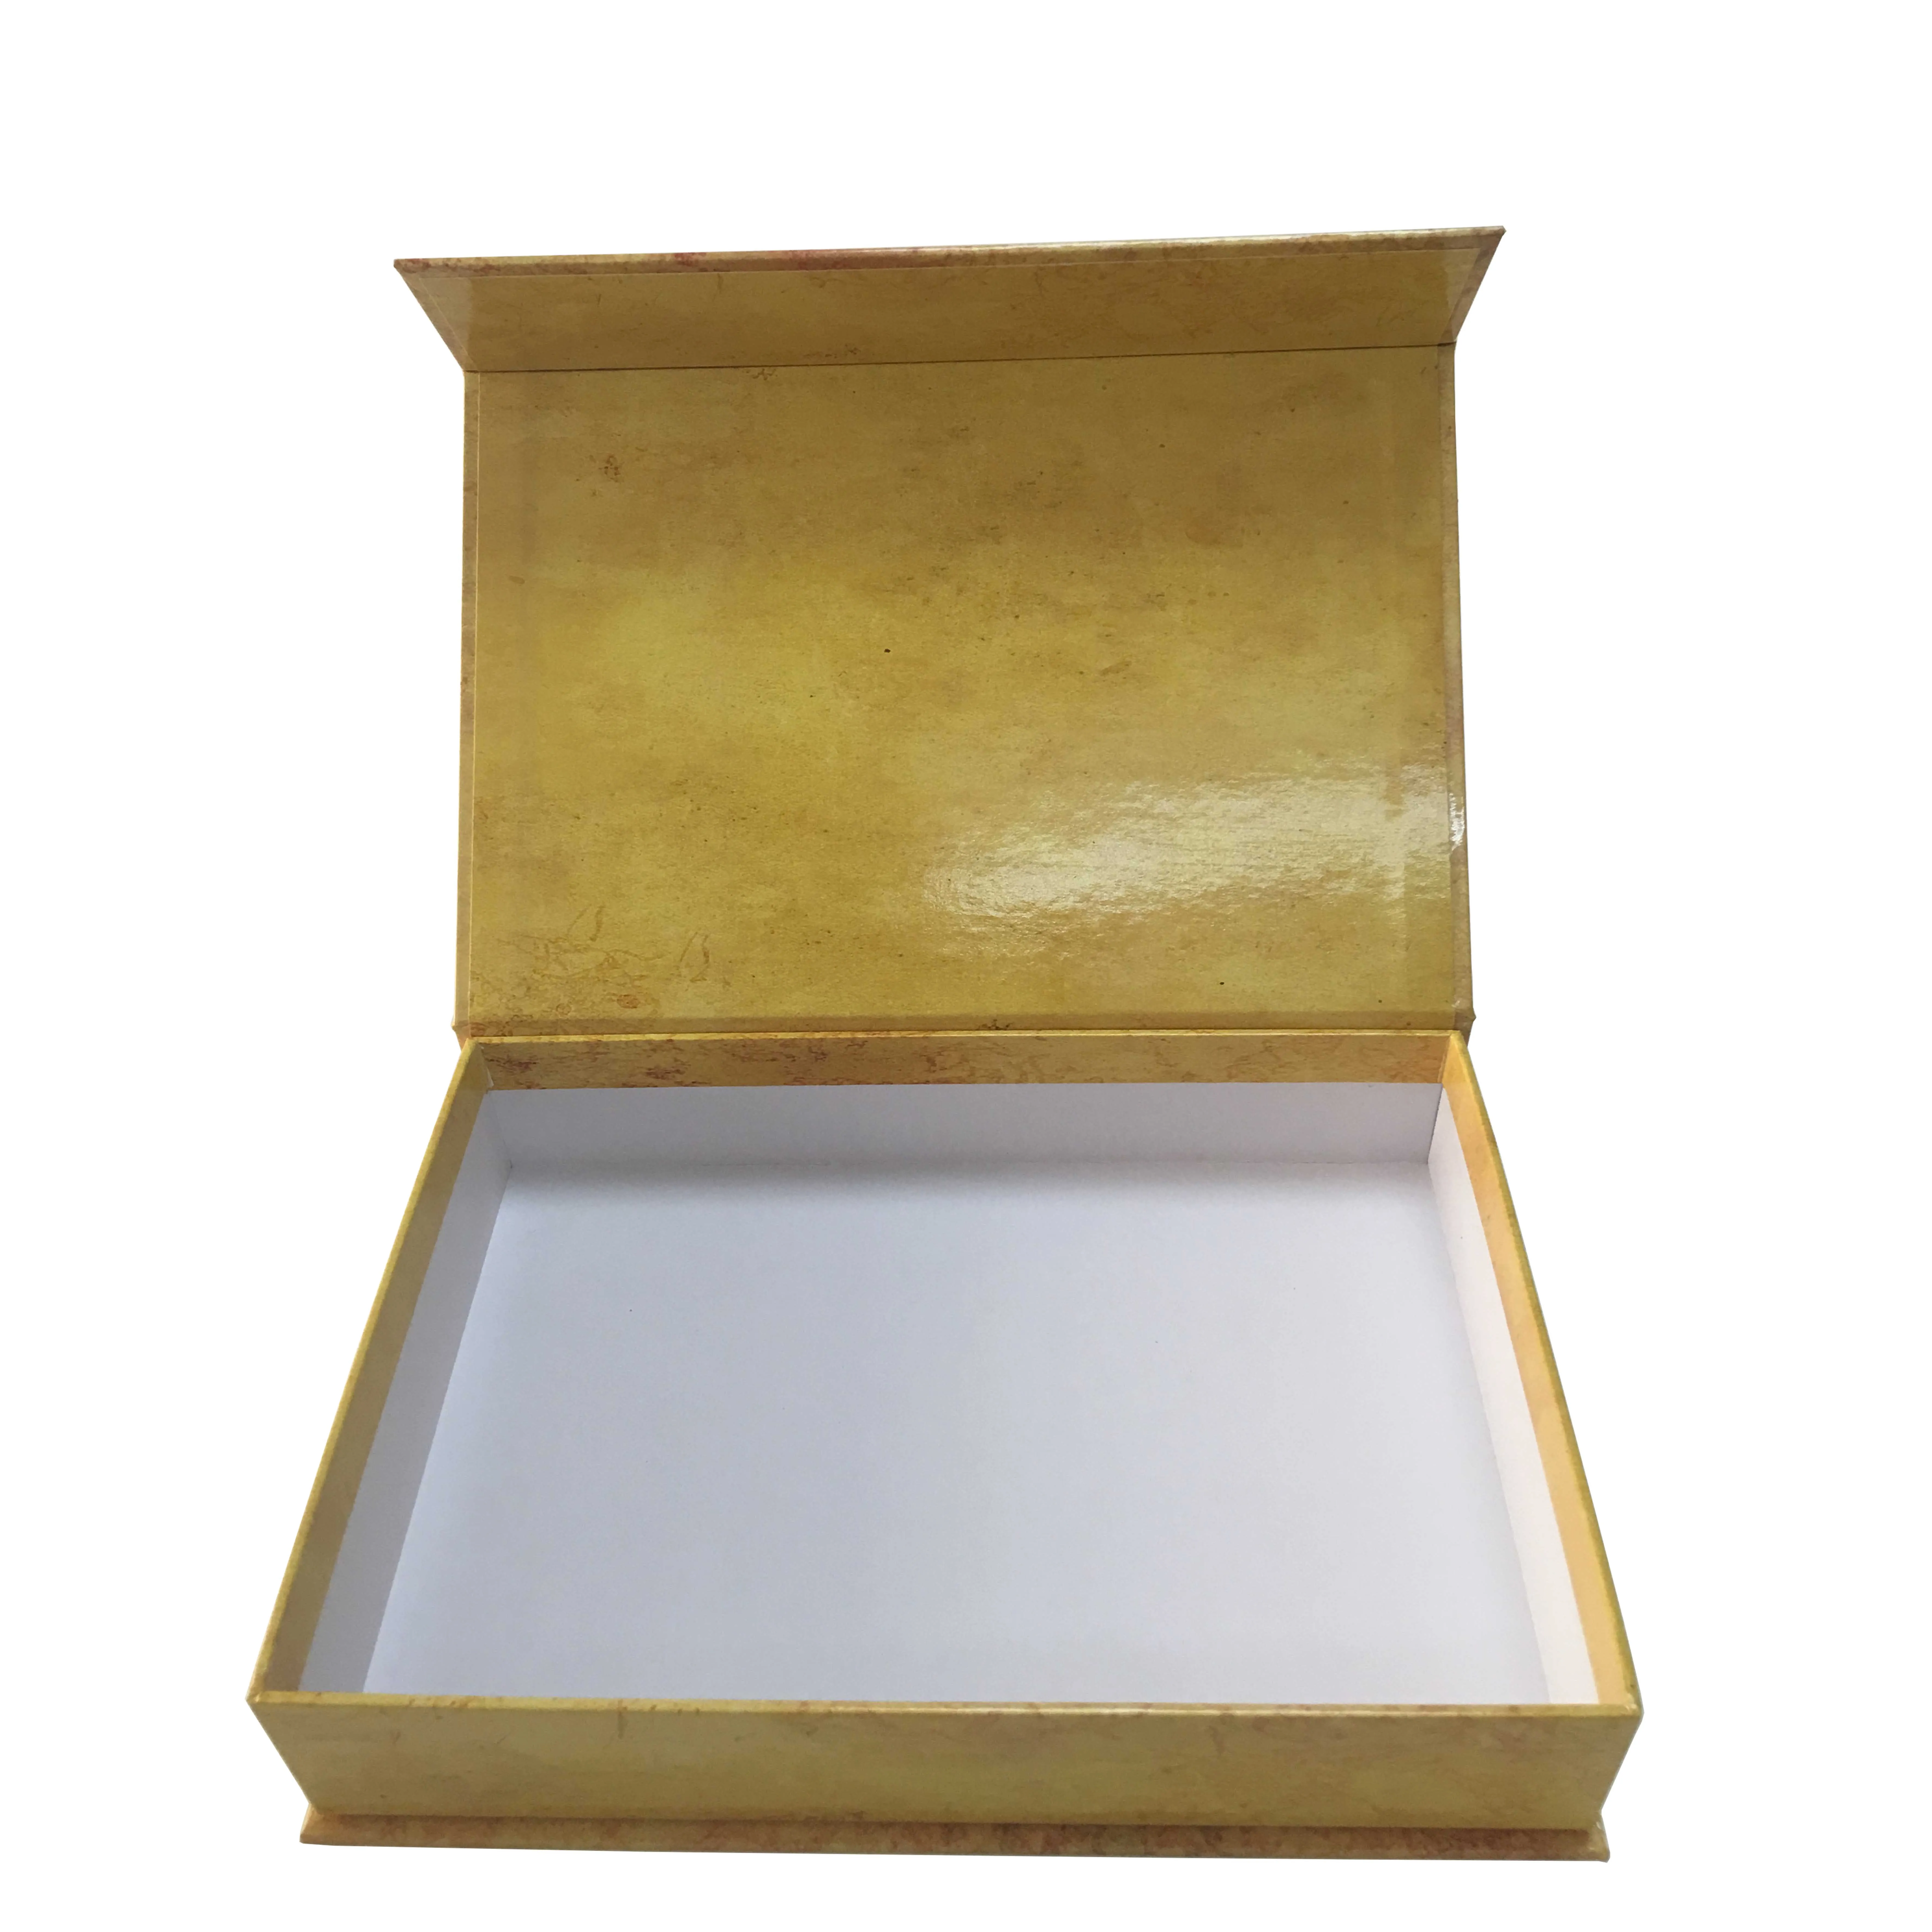 Luxury a4 size paper box with your design and logo